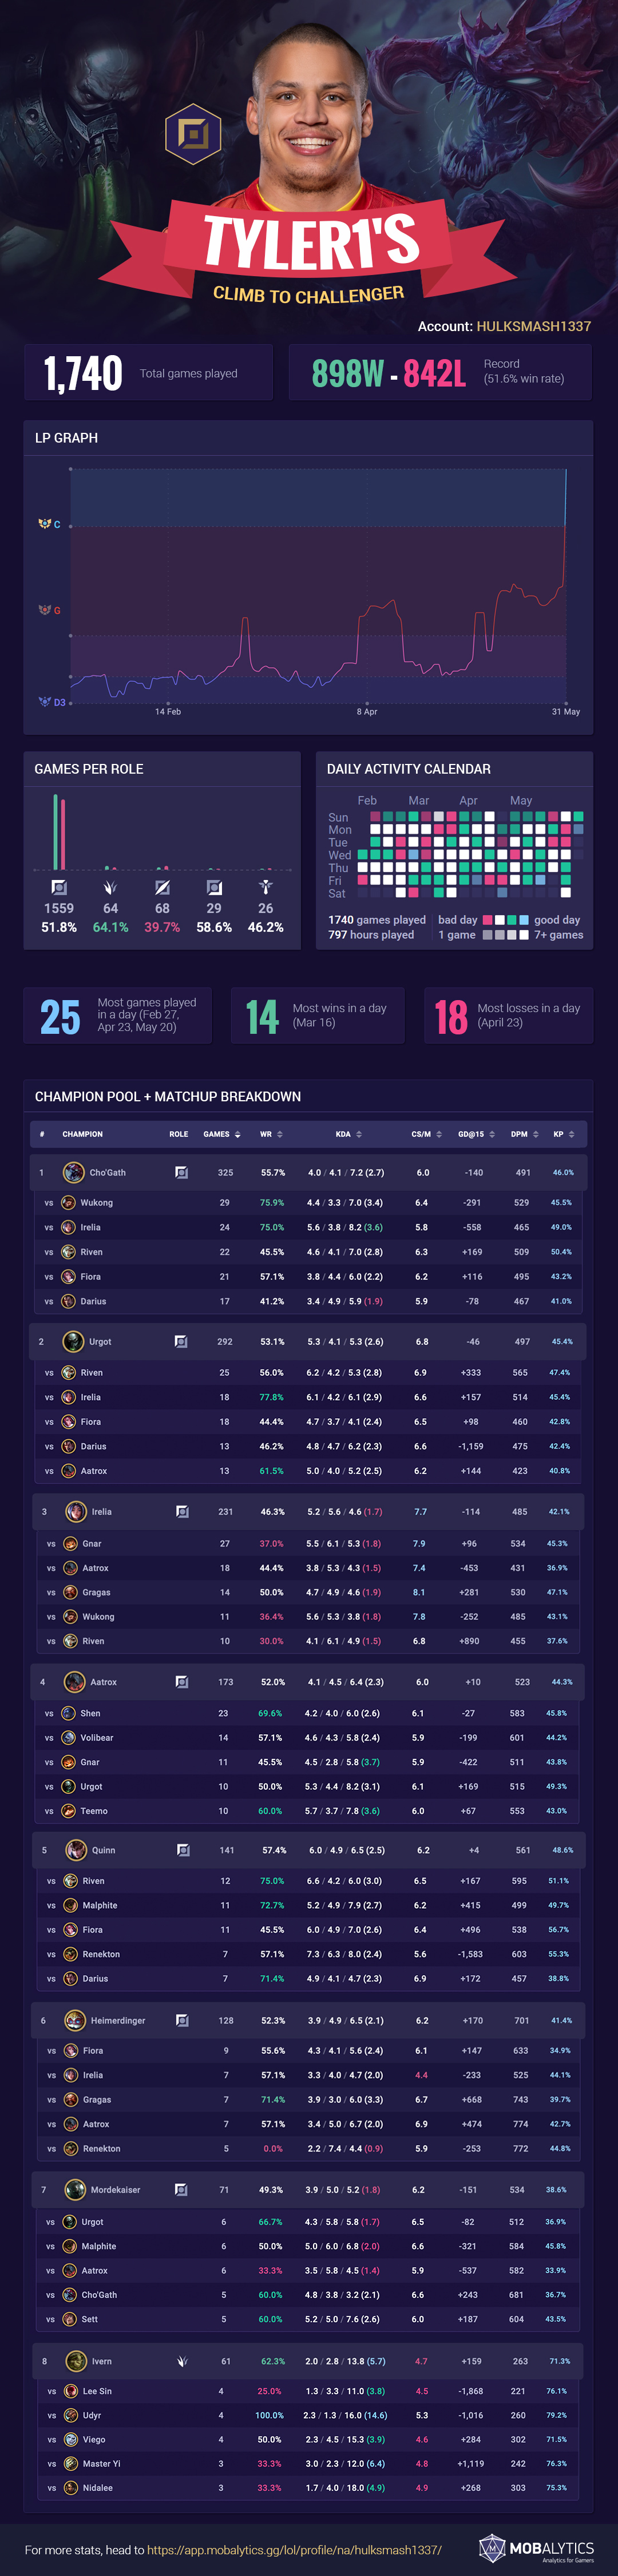 Tyler1’s Unranked to Challenger Top Climb (Season 11) – Infographic